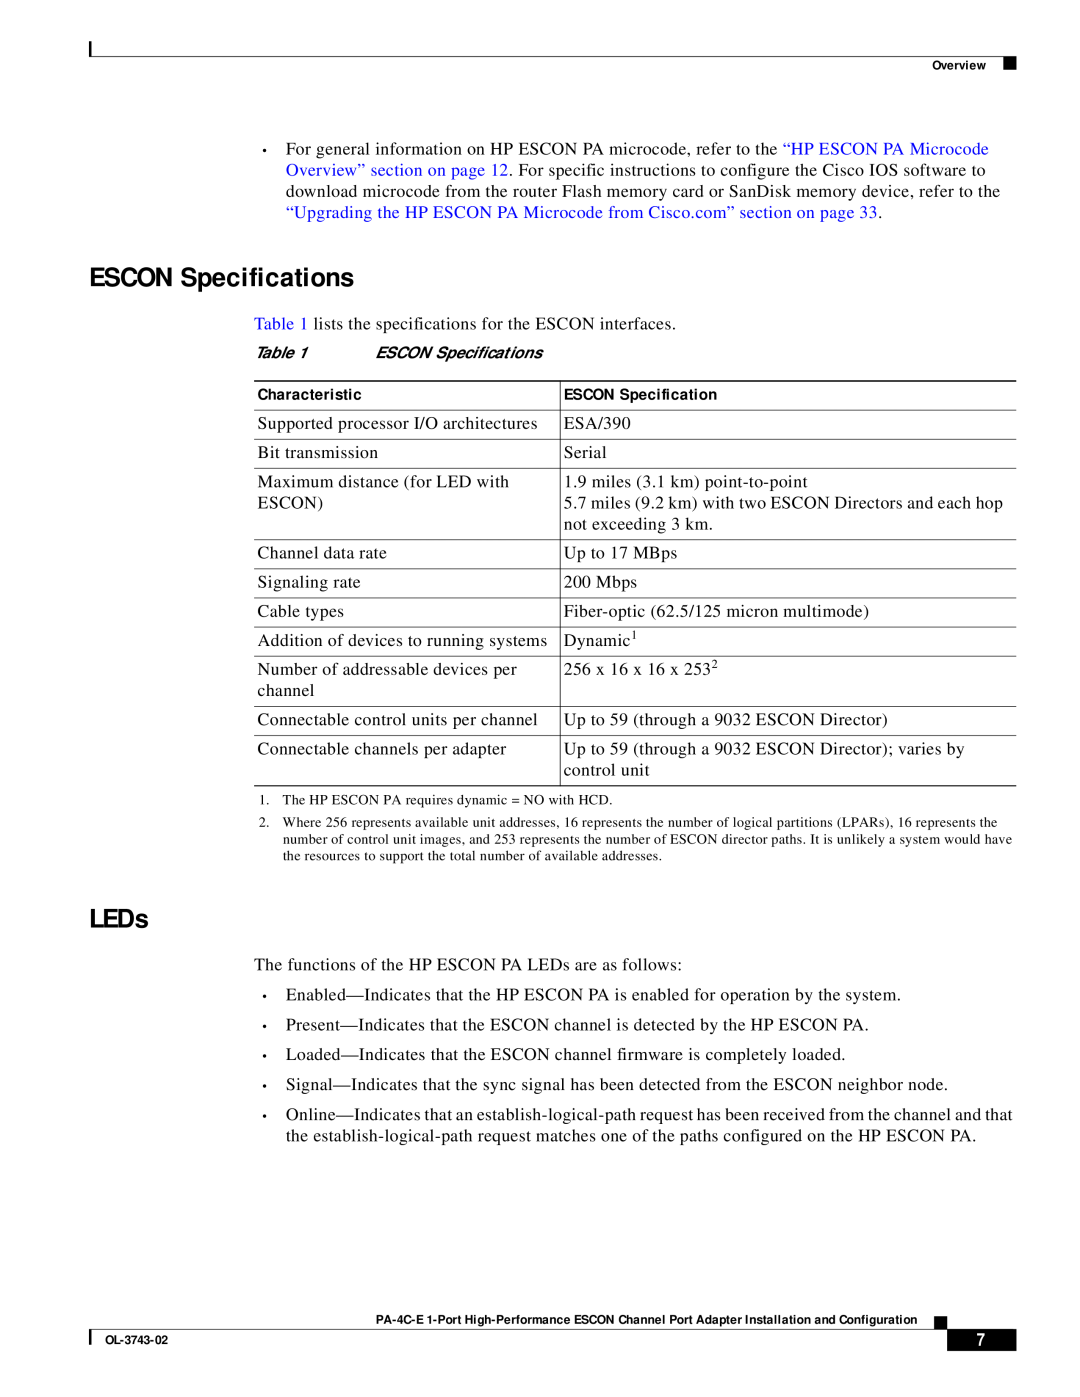 Cisco Systems PA-4C-E 1 manual ESCON Specifications, LEDs, Characteristic 